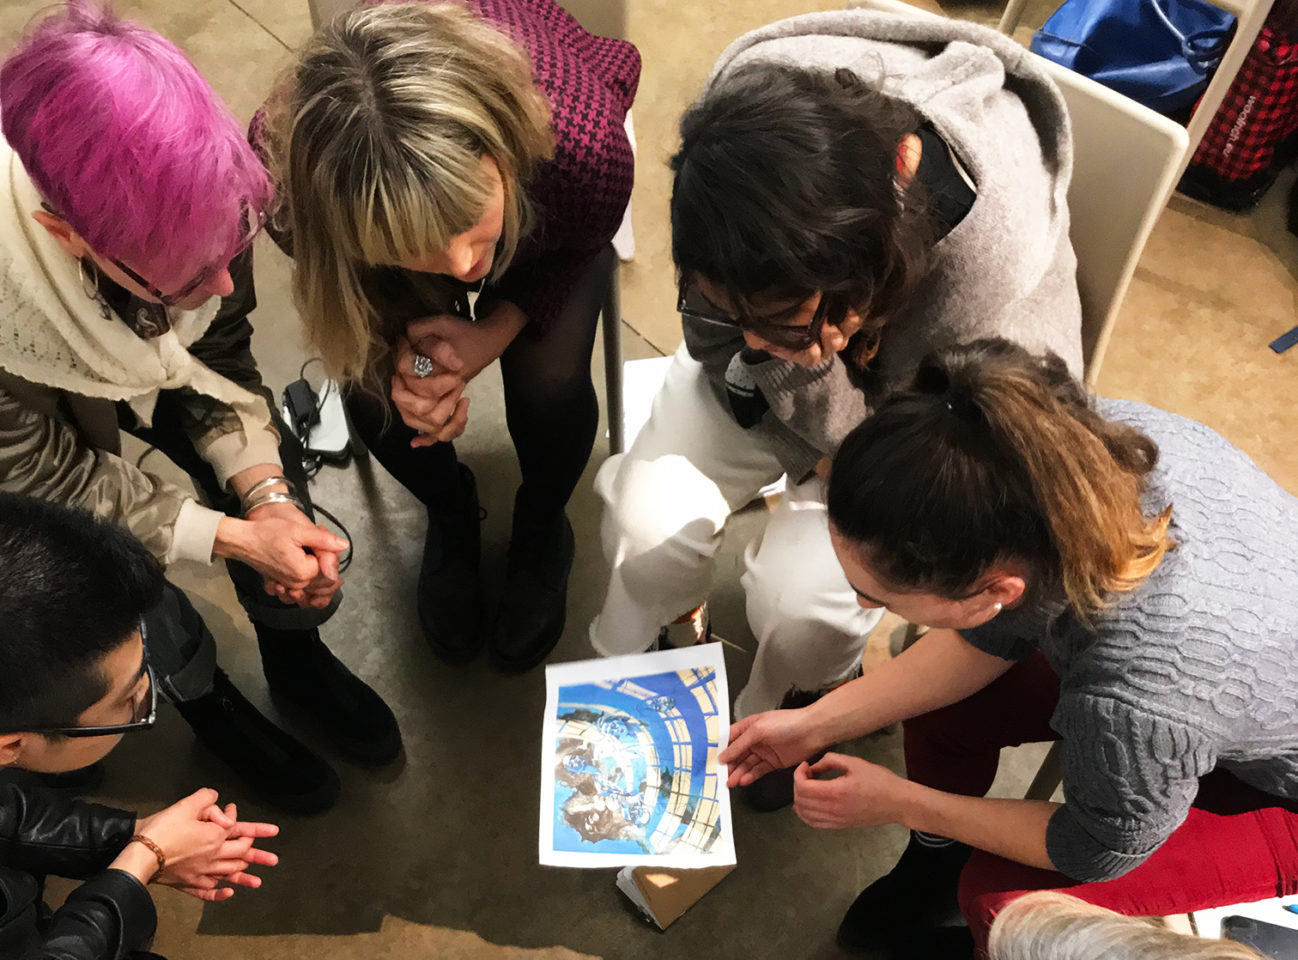 A group of people sitting in a circle examining an artwork on a piece of paper